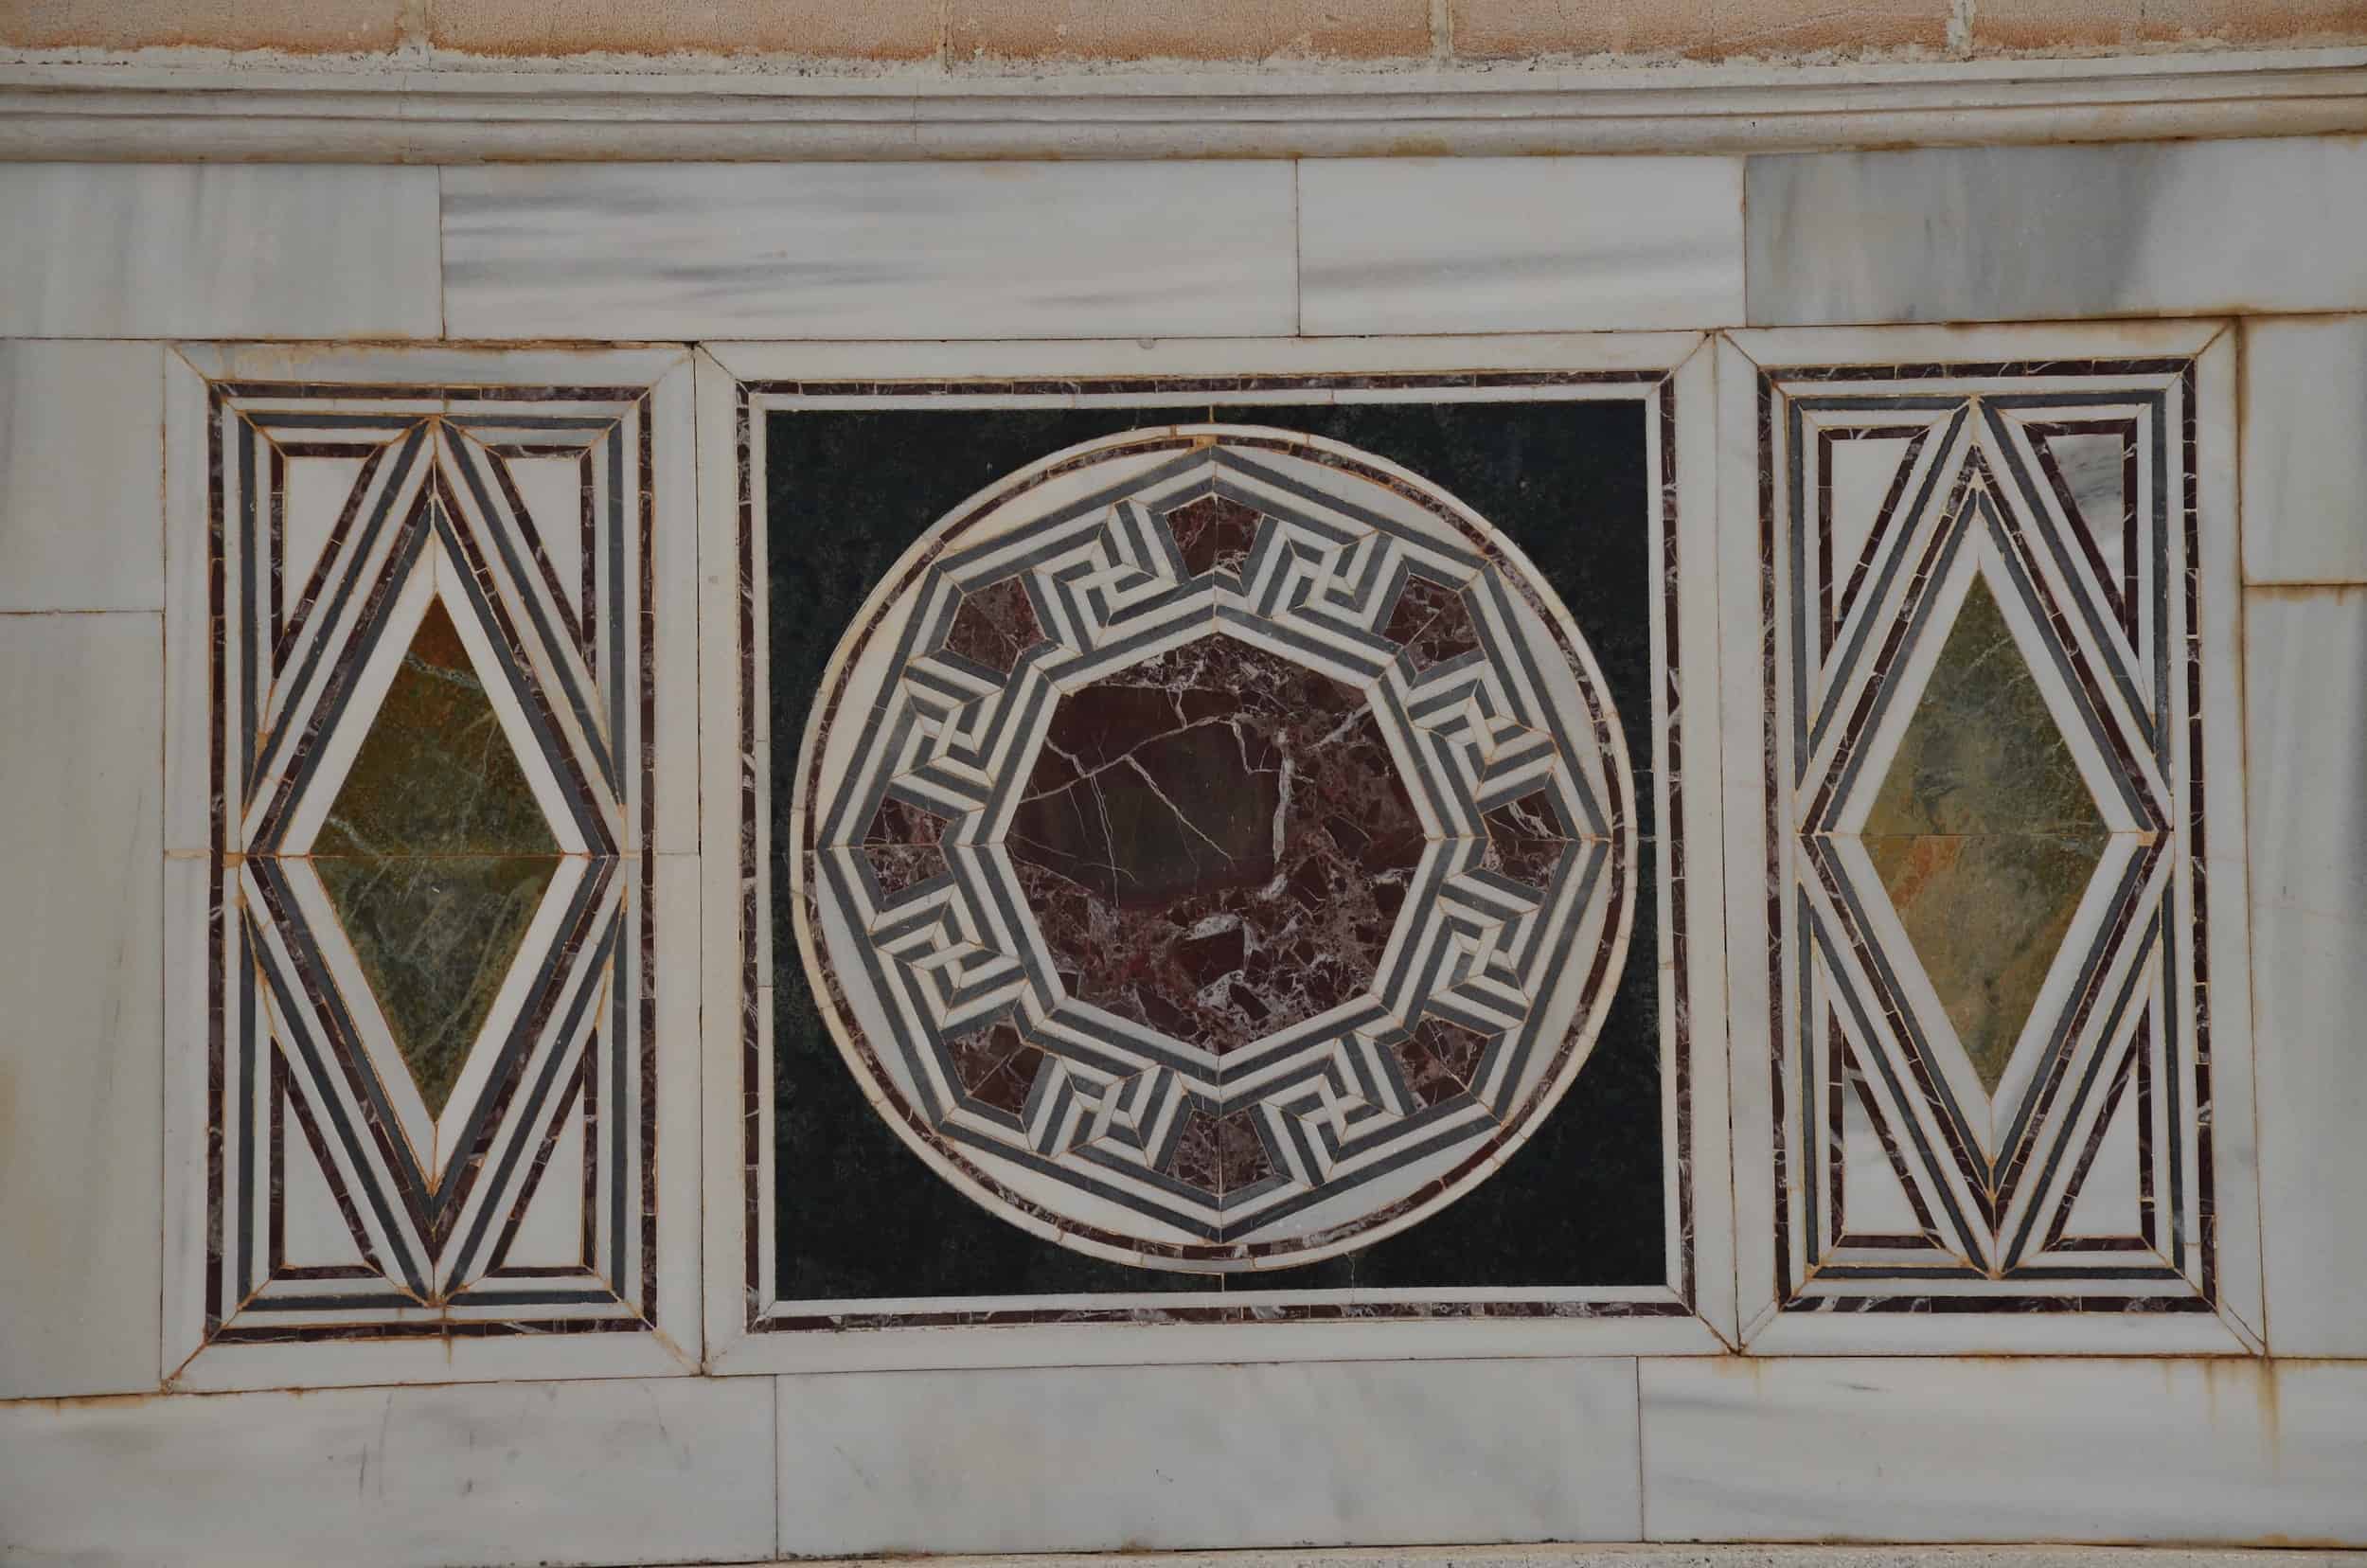 Marble panel on the south wall in the main hall of the Sardis Synagogue